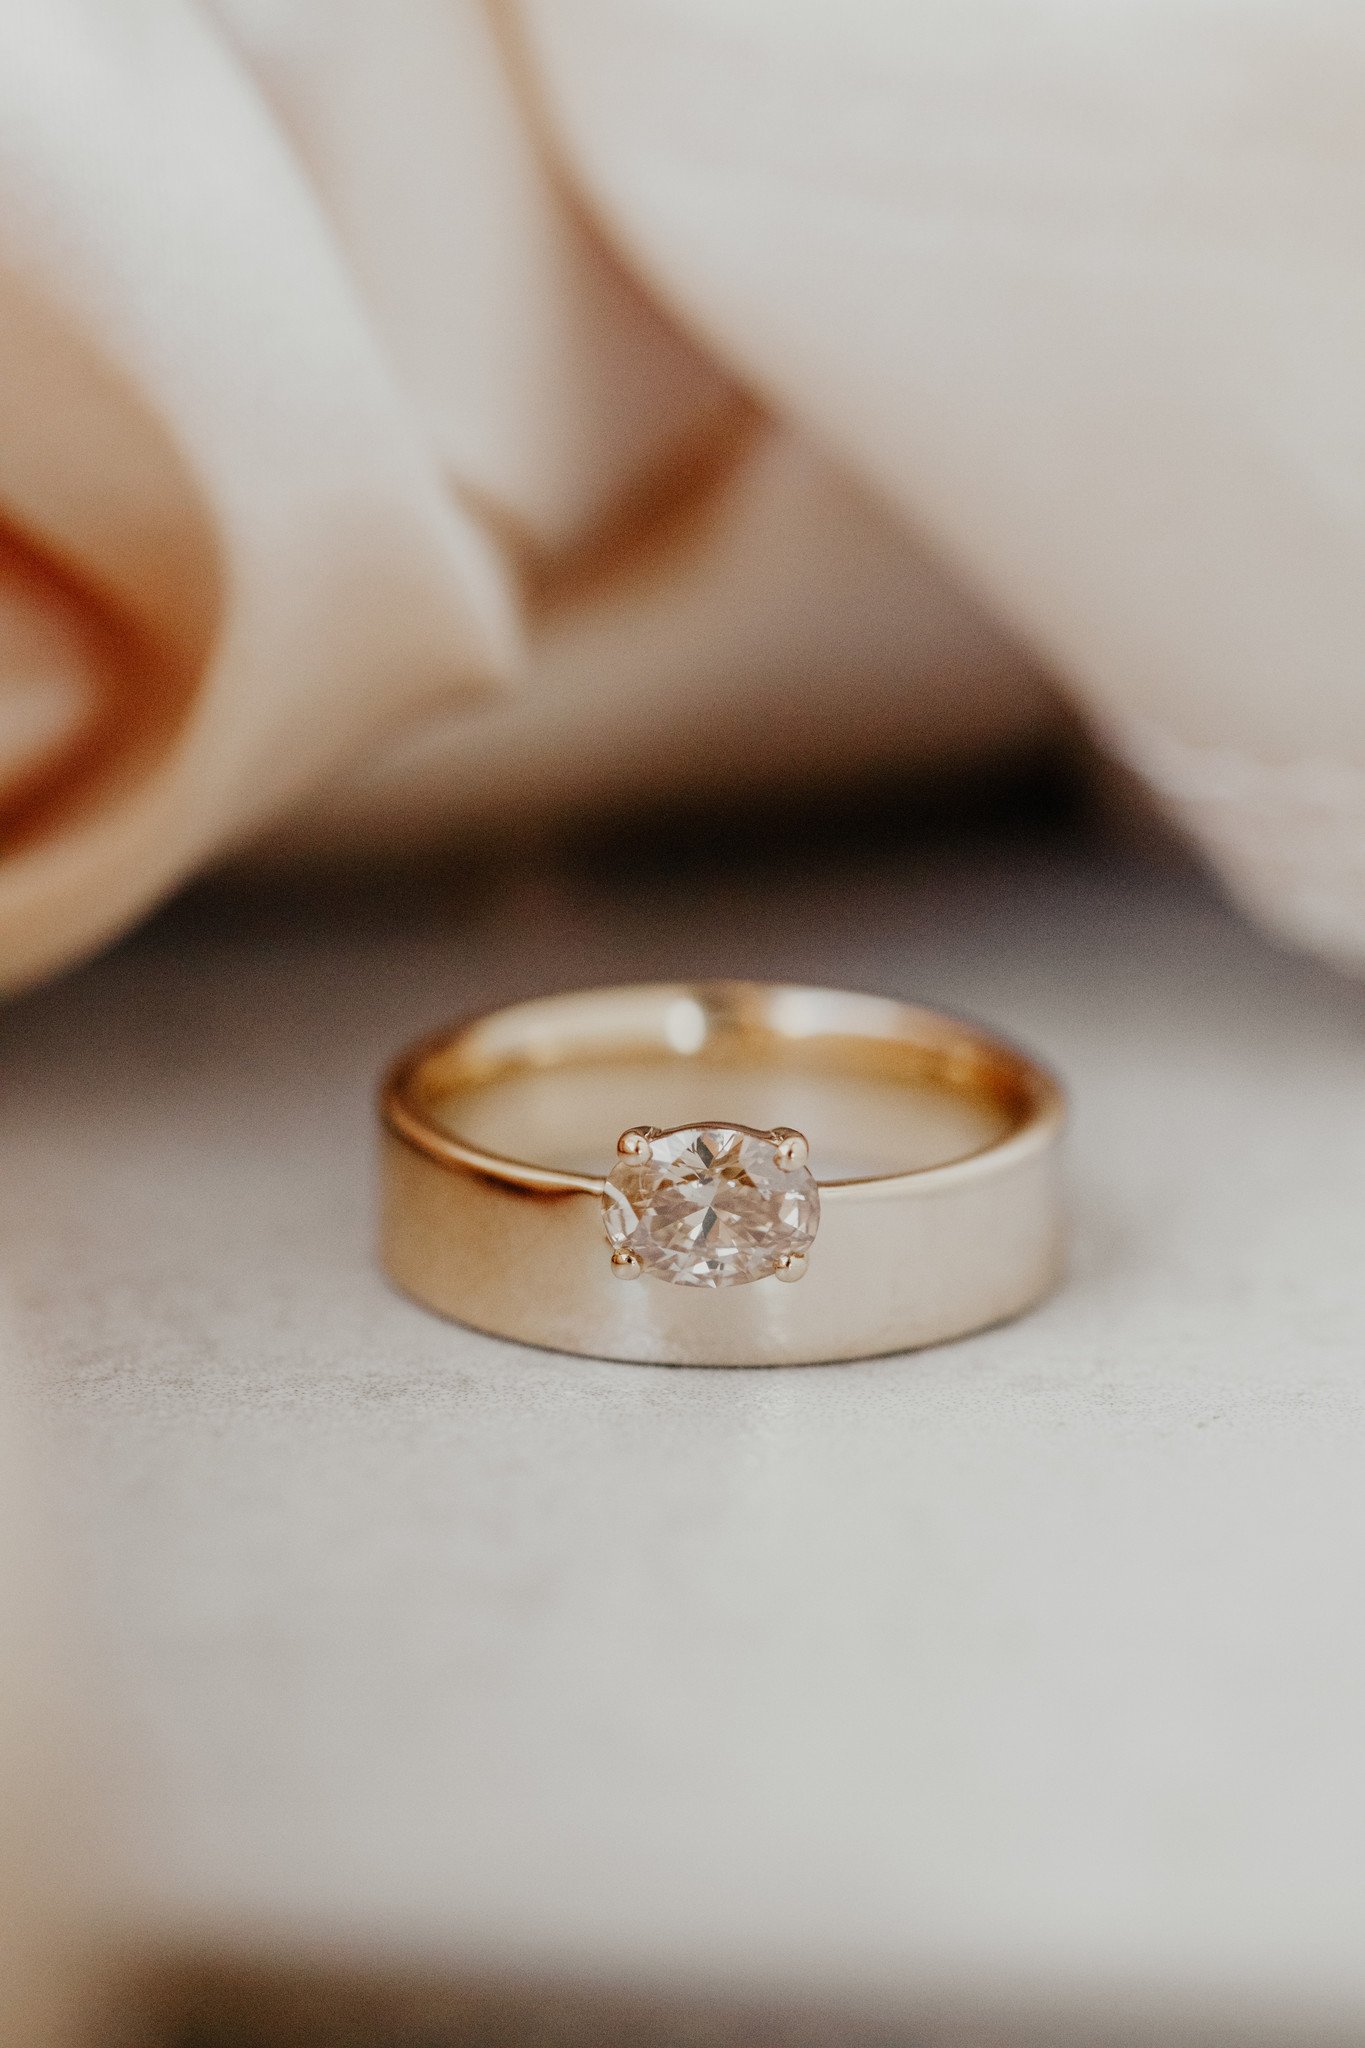 Champagne Diamond Engagement Rings | Unique Gold Rings 6.75 US